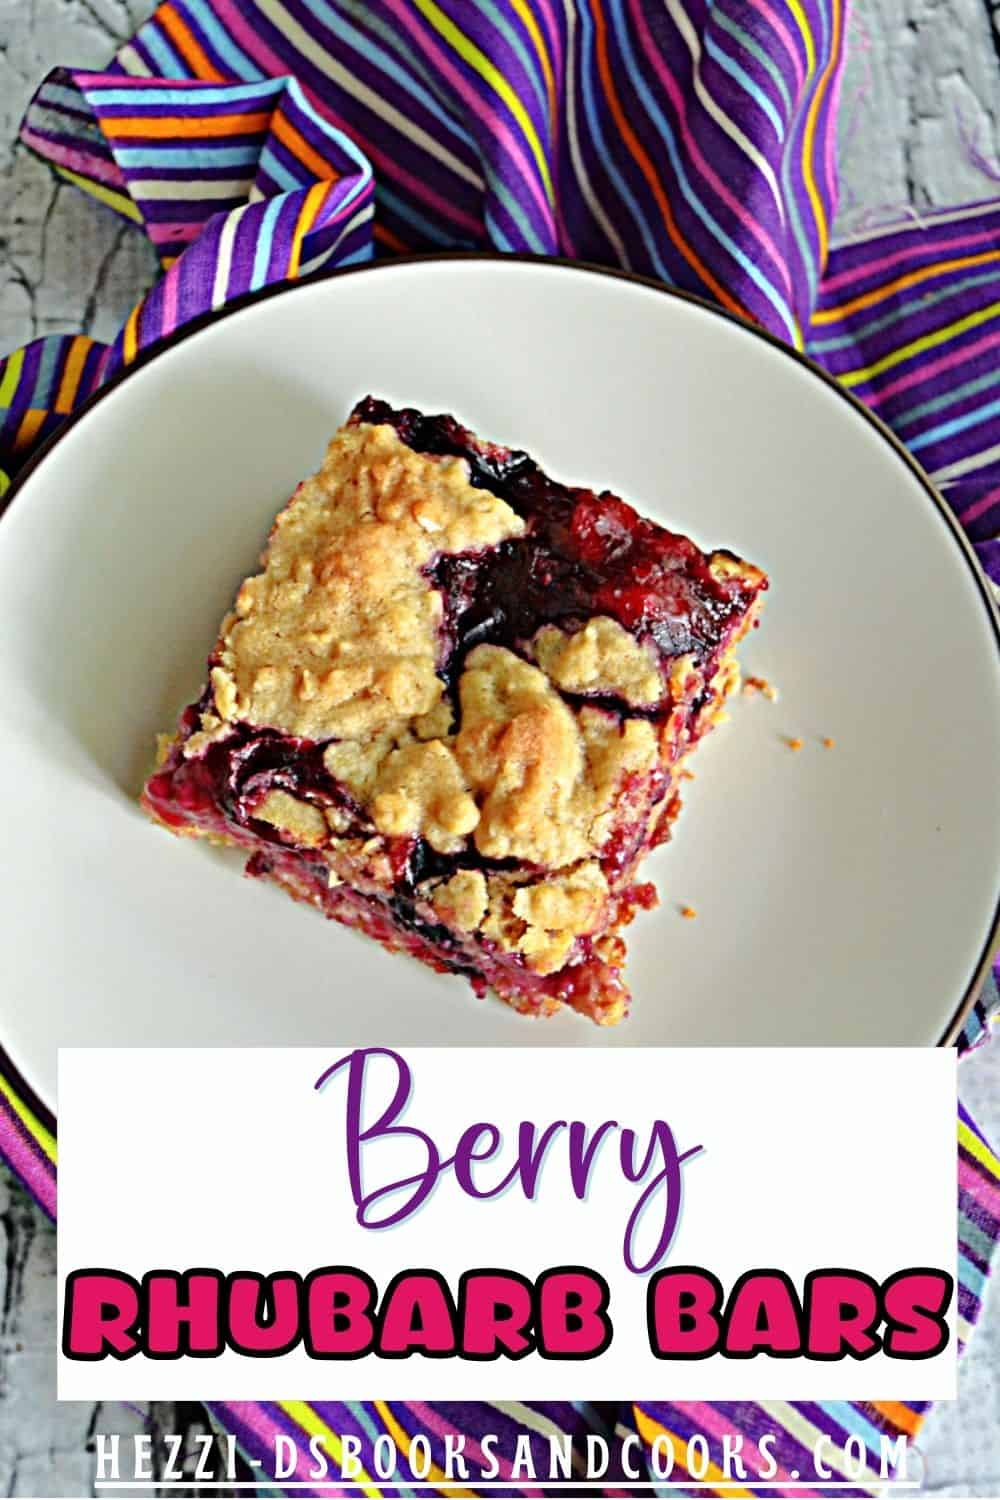 Pin Image: A plate with a berry rhubarb bar on it, text title